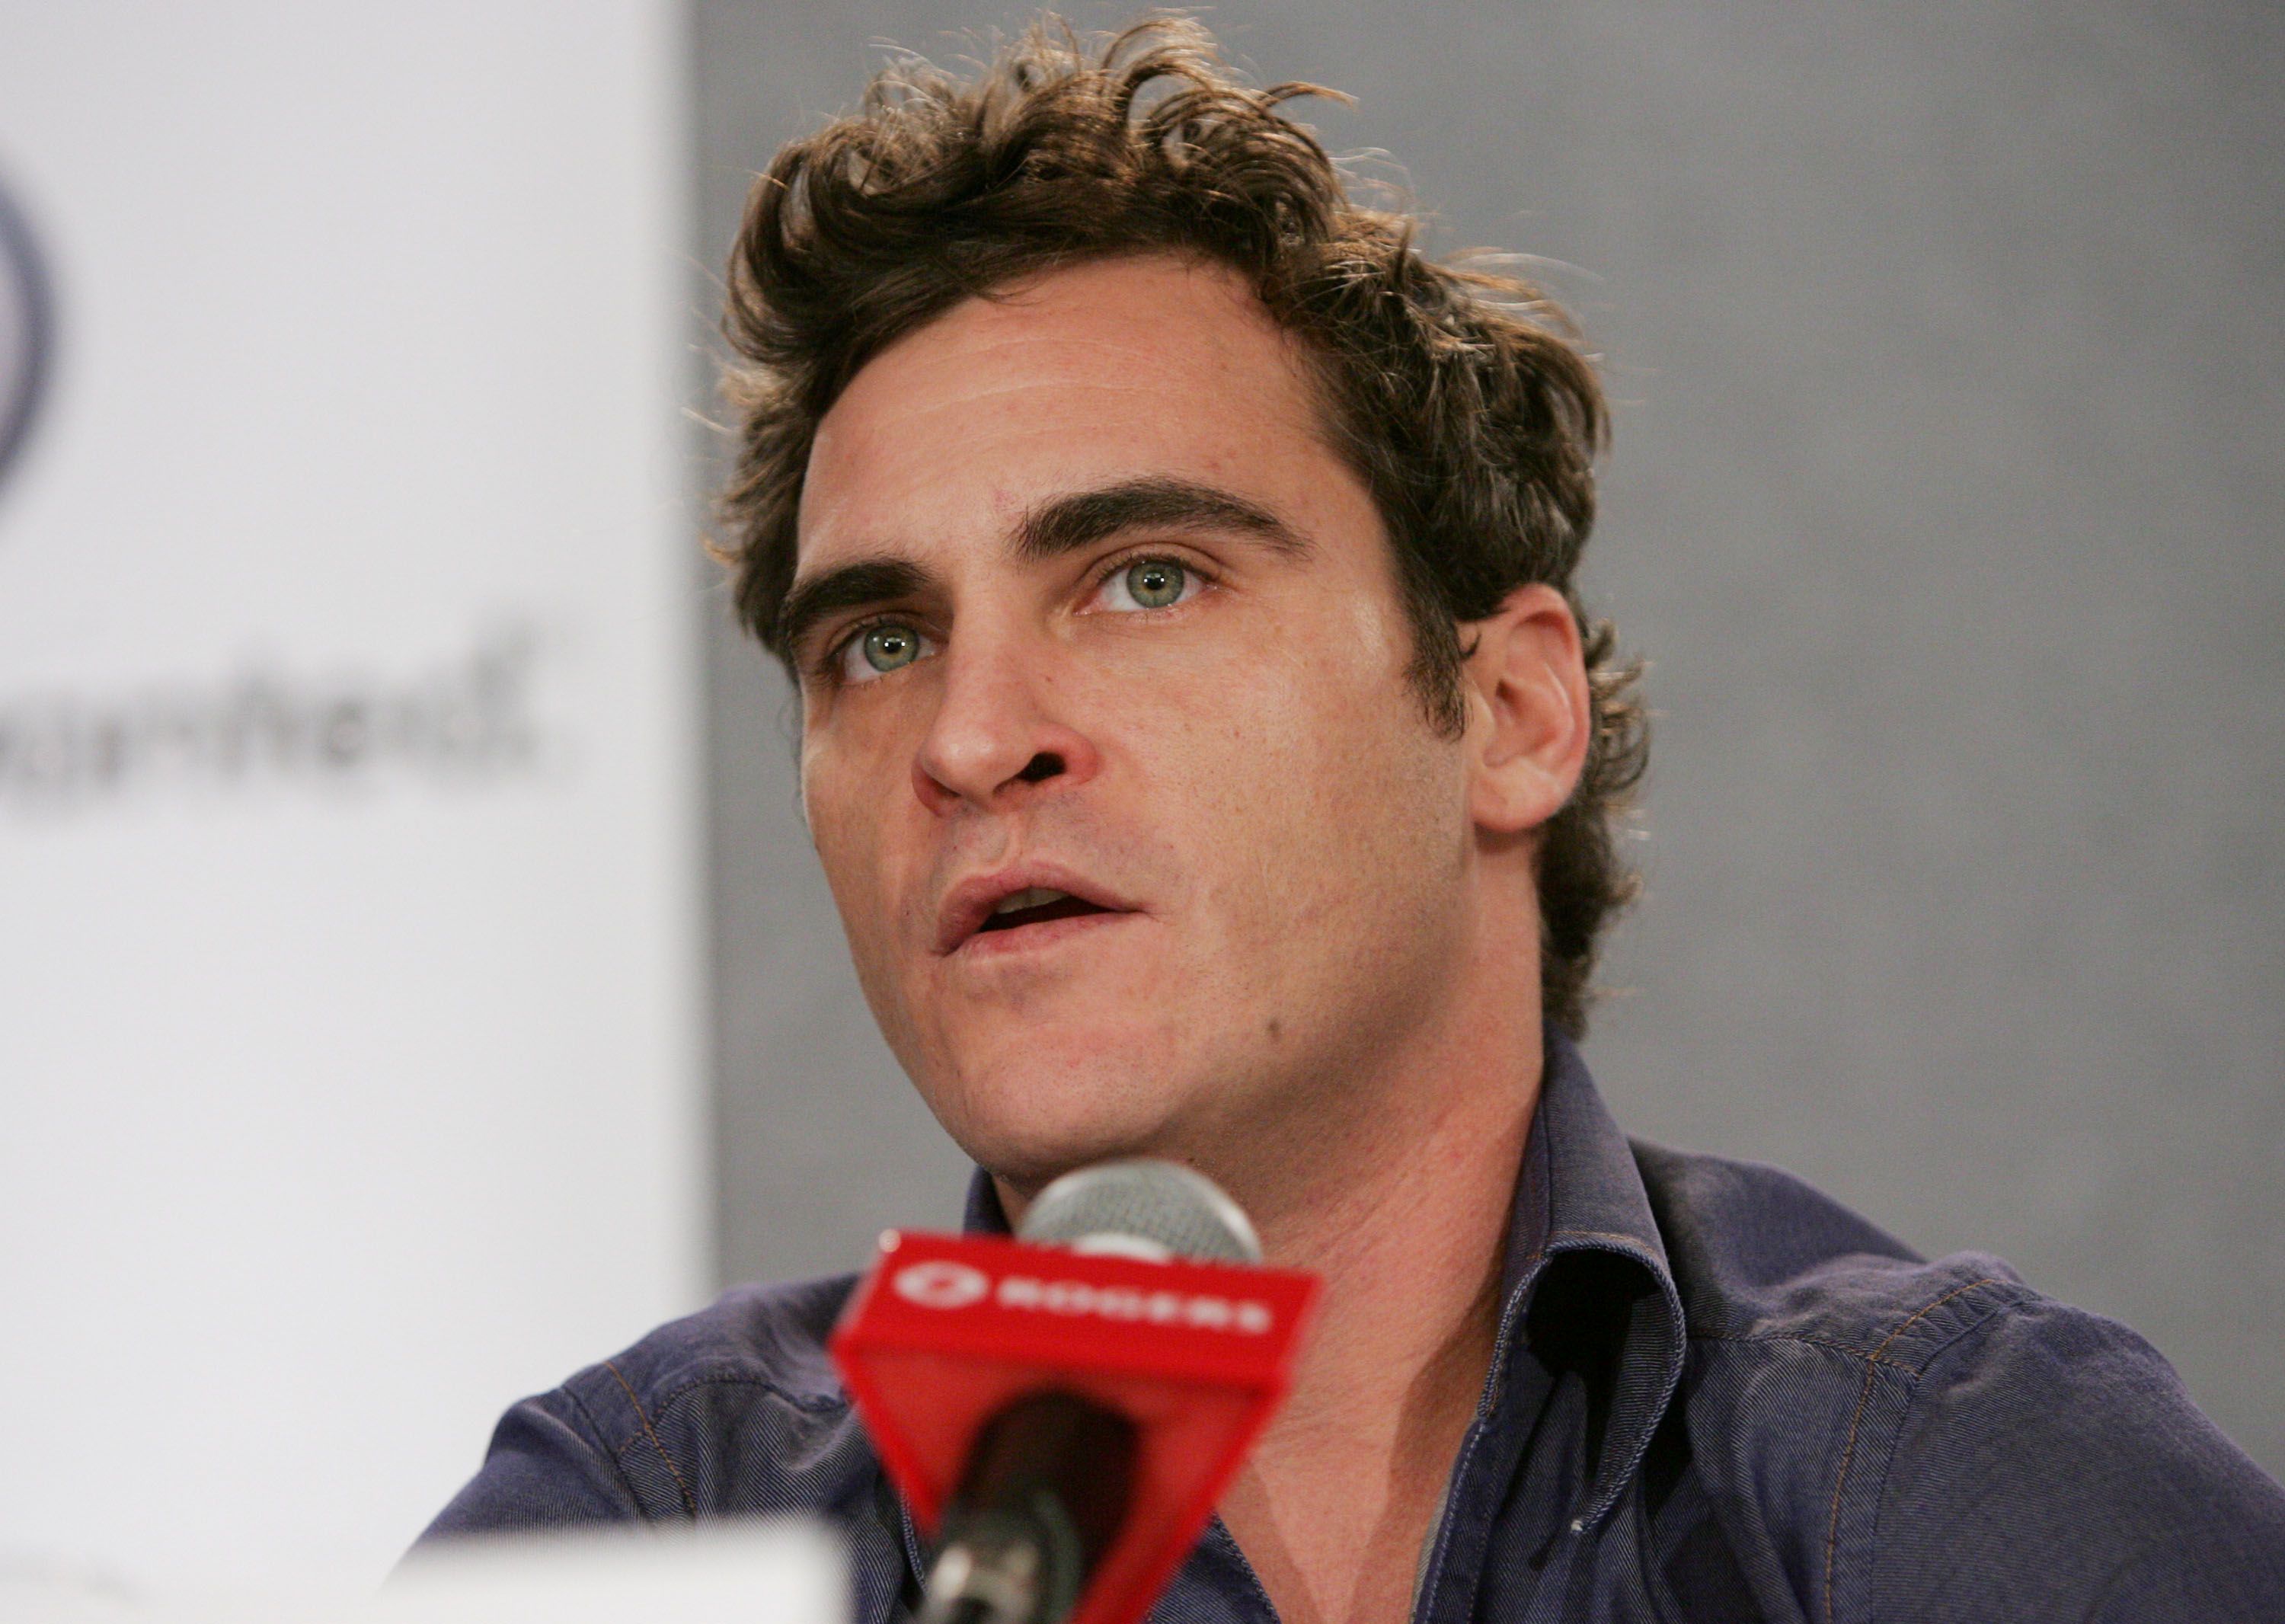 TORONTO - SEPTEMBER 13: Actor Joaquin Phoenix attends the "Walk The Line" press conference during the 2005 Toronto International Film Festival September 13, 2005 in Toronto, Ontario, Canada. | Foto von: Evan Agostini/Getty Images